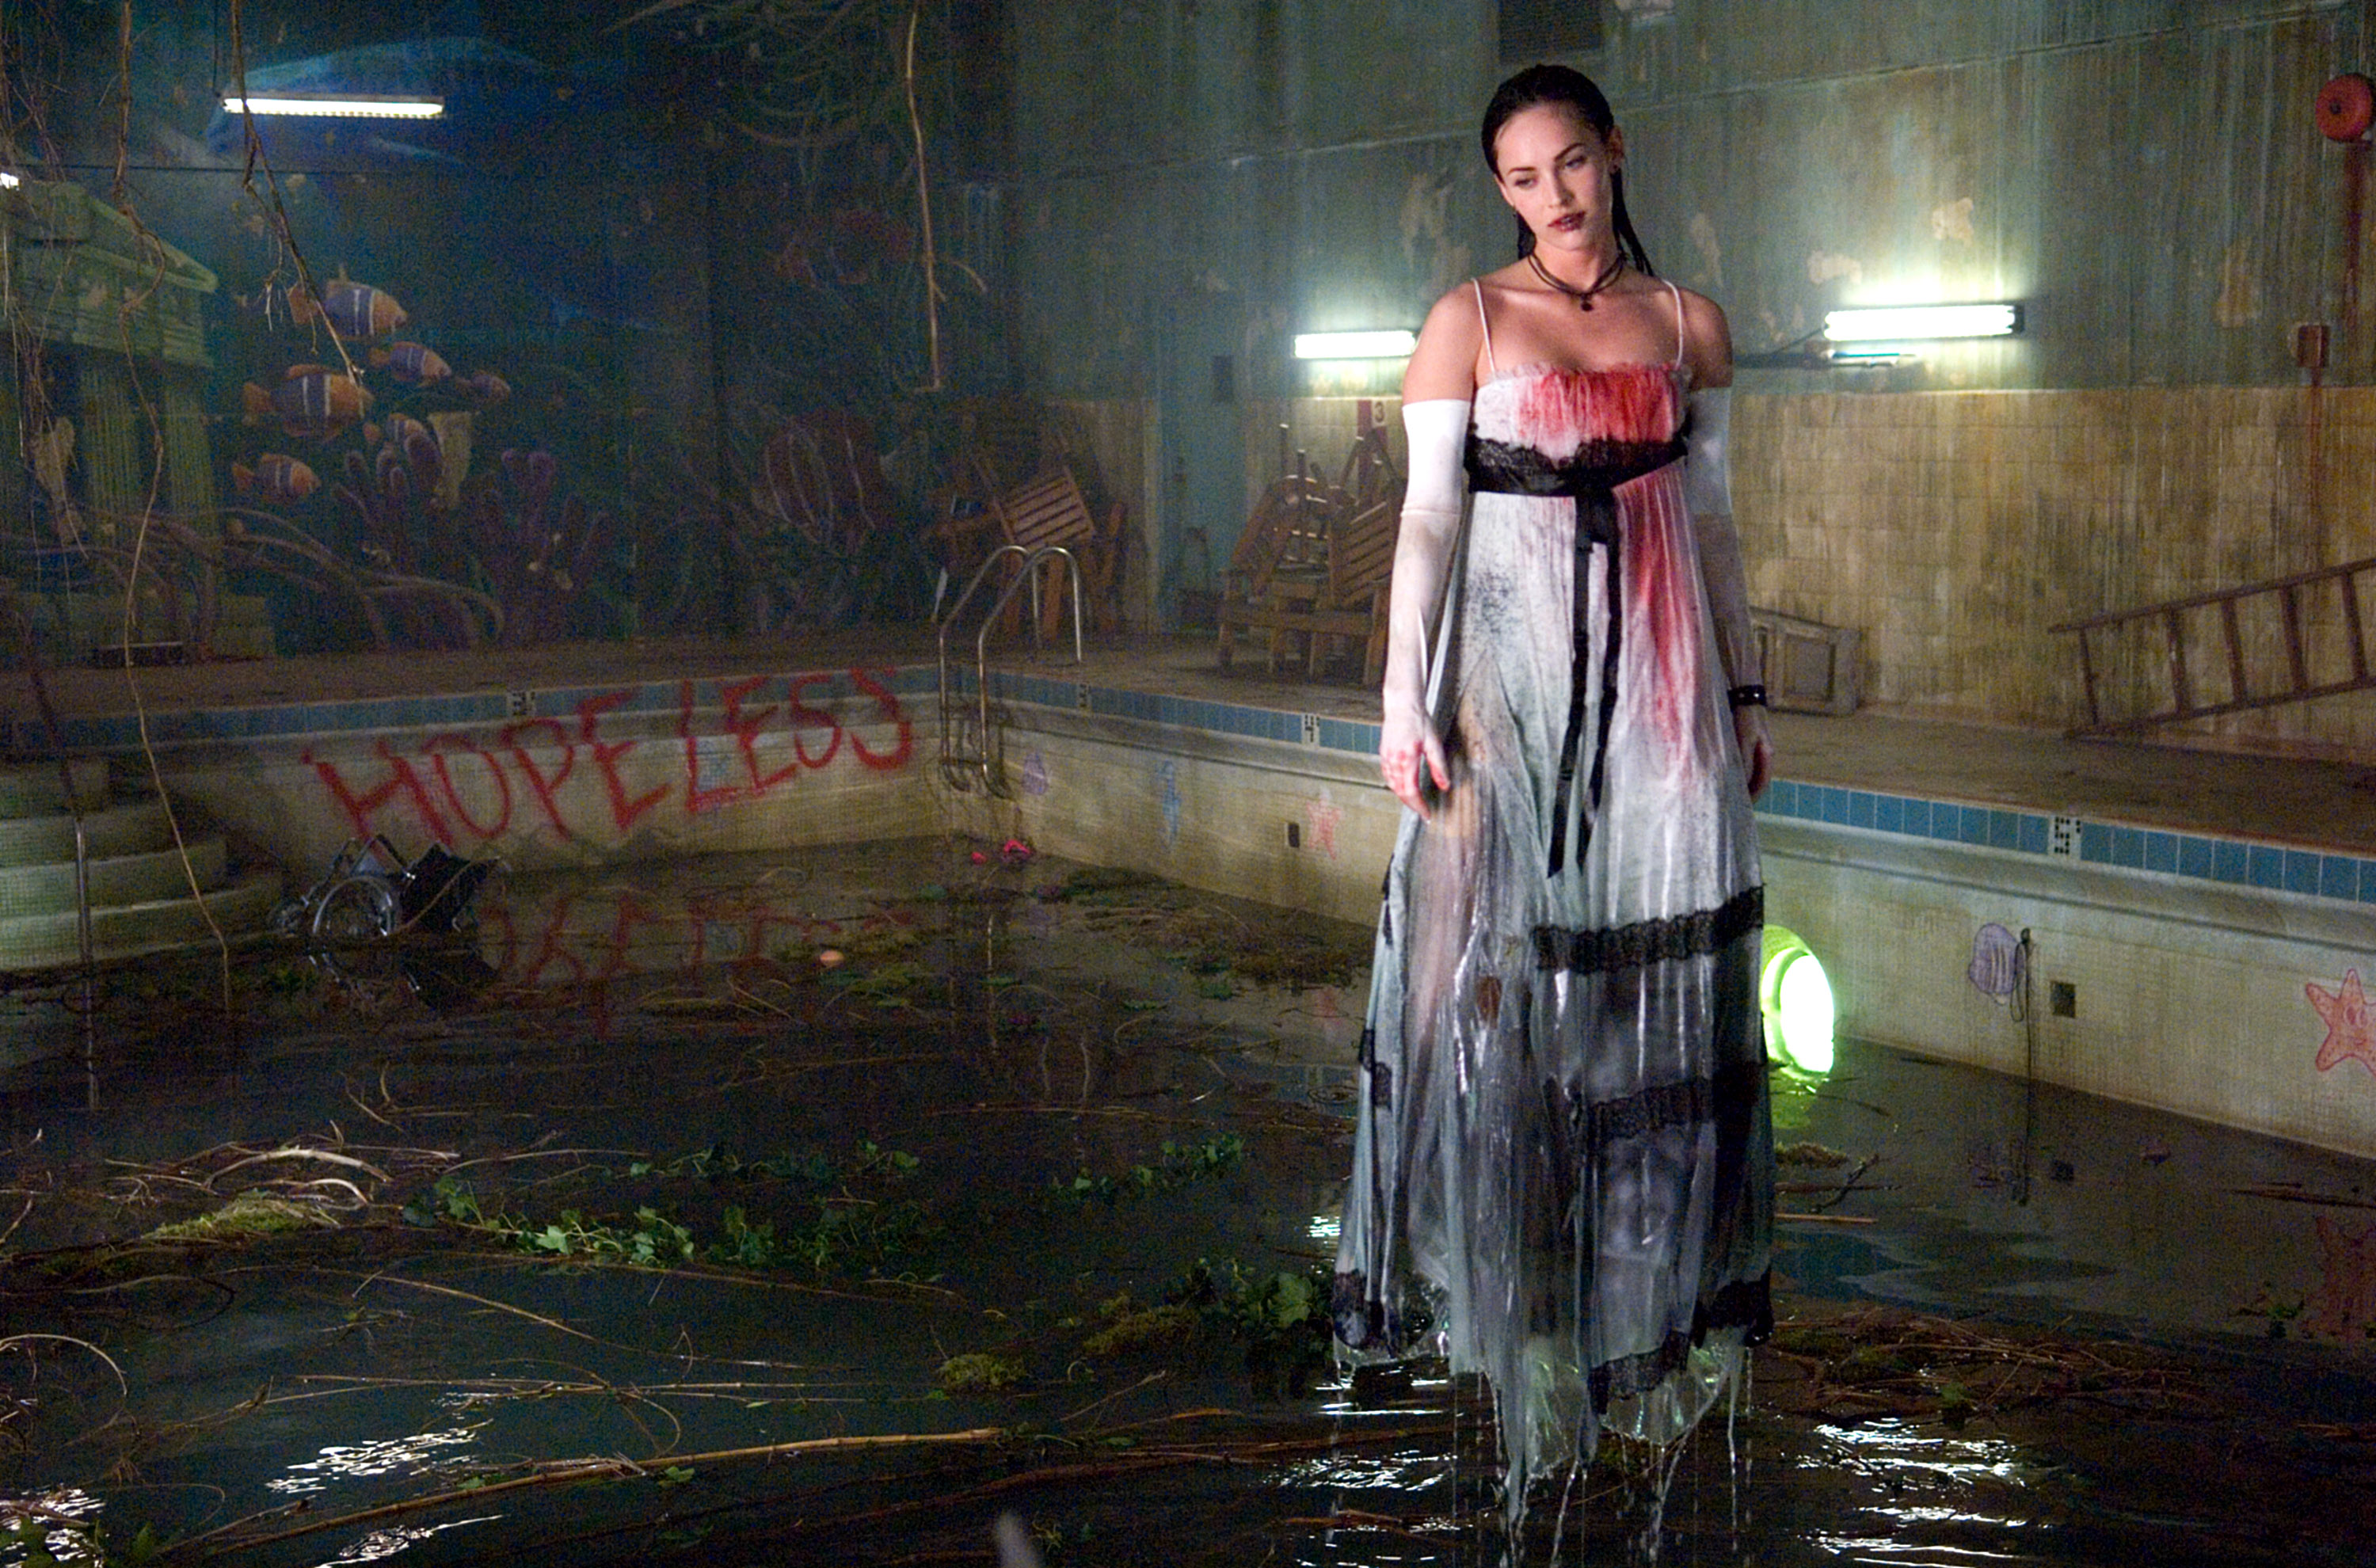 Megan Fox stands in a bloody dress.